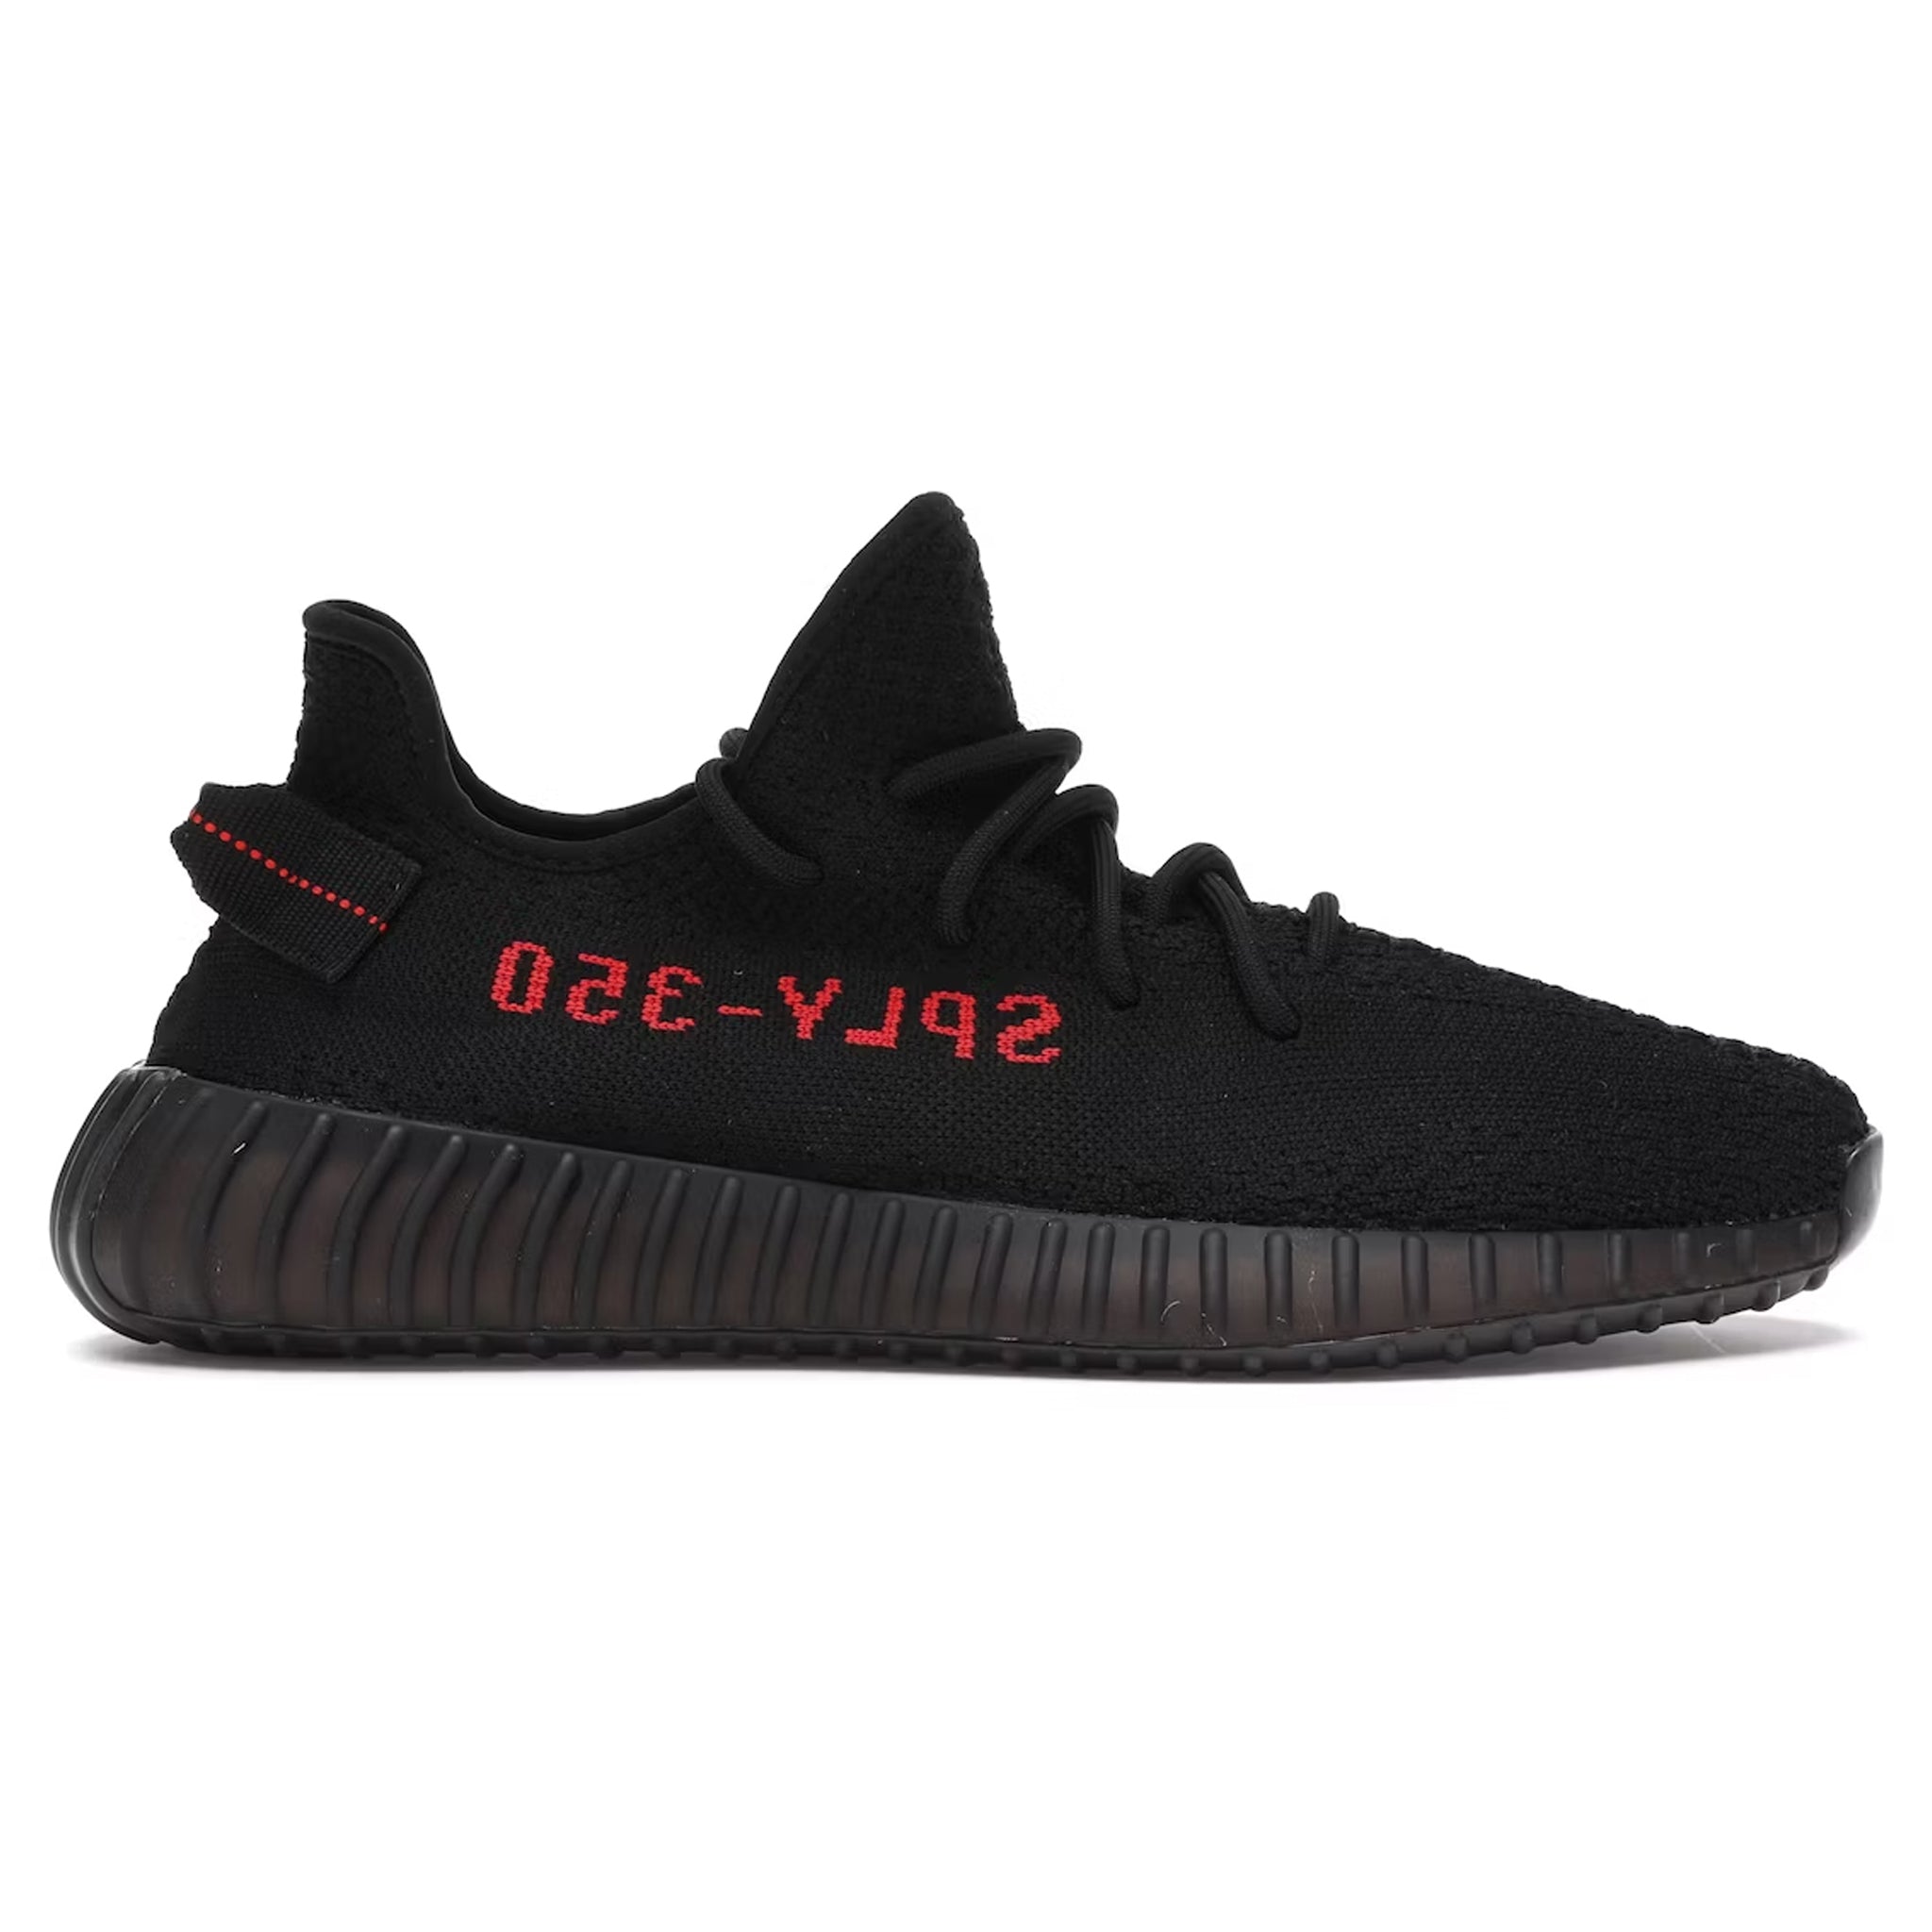 Side view of Adidas Yeezy Boost 350 V2 Bred Core Black Red CP9652